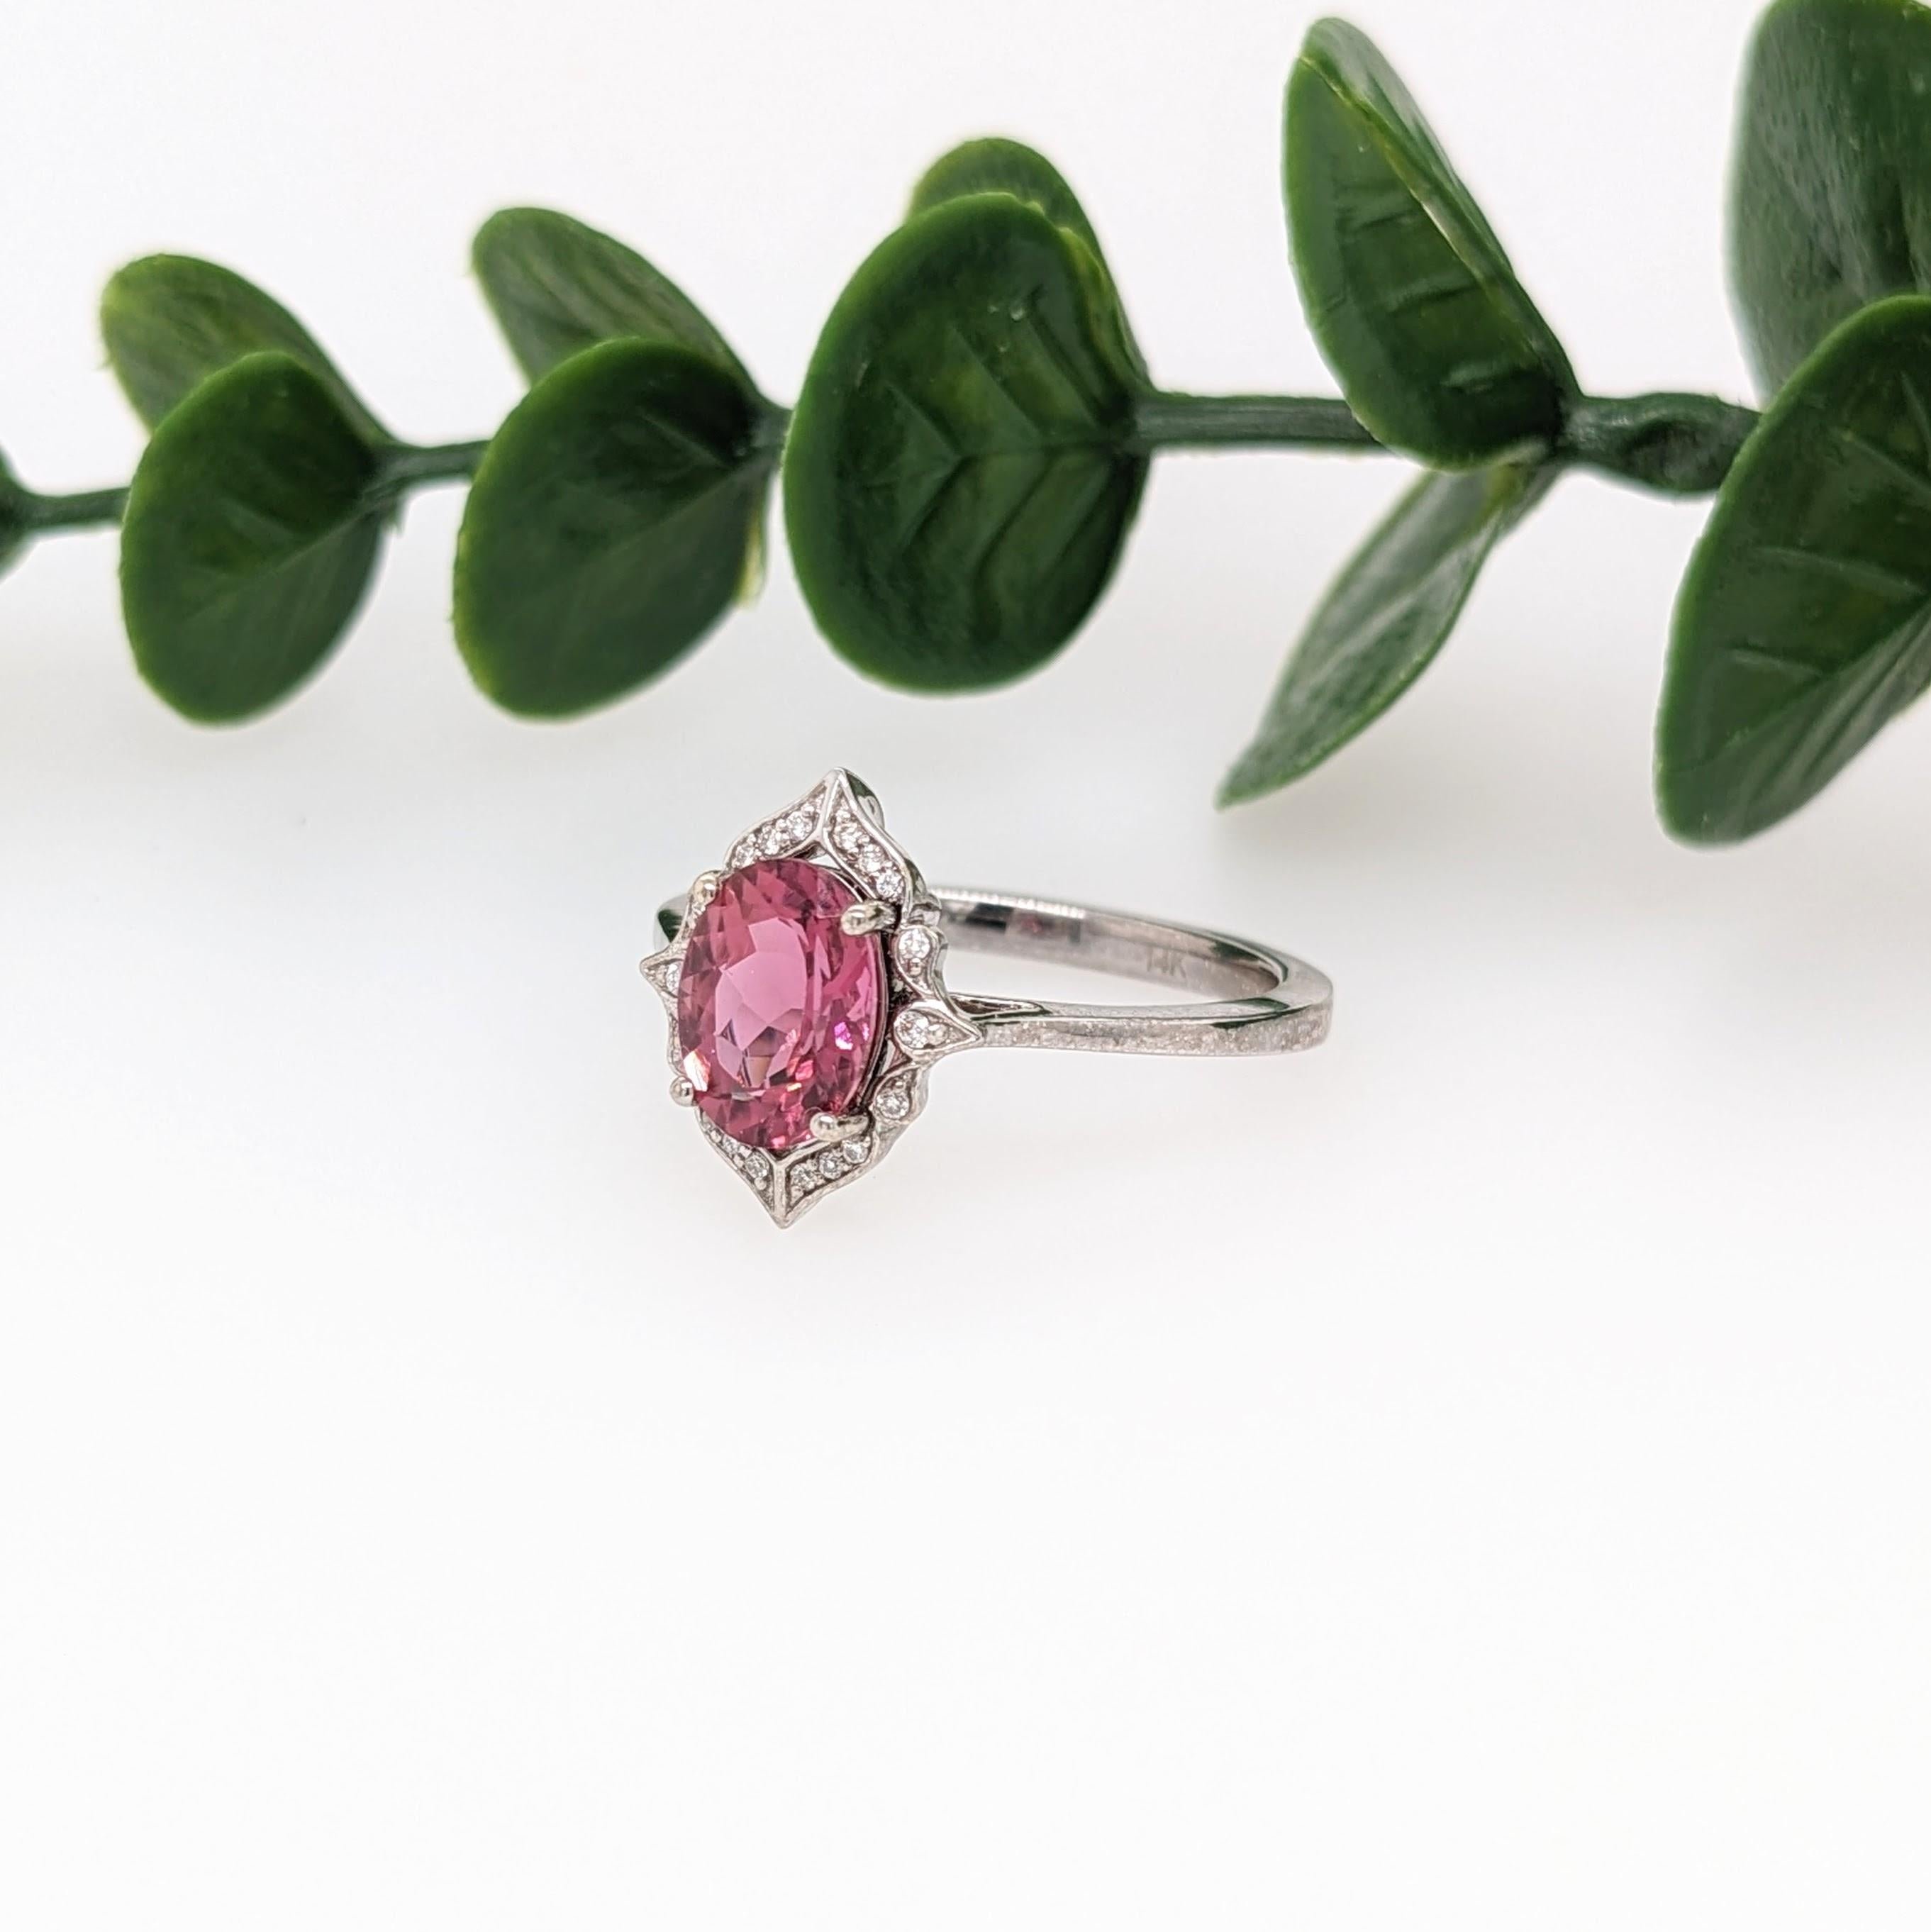 Art Deco 1.7ct Vintage Style Tourmaline Ring w Diamond Halo in 14K White Gold Oval 8x6mm For Sale